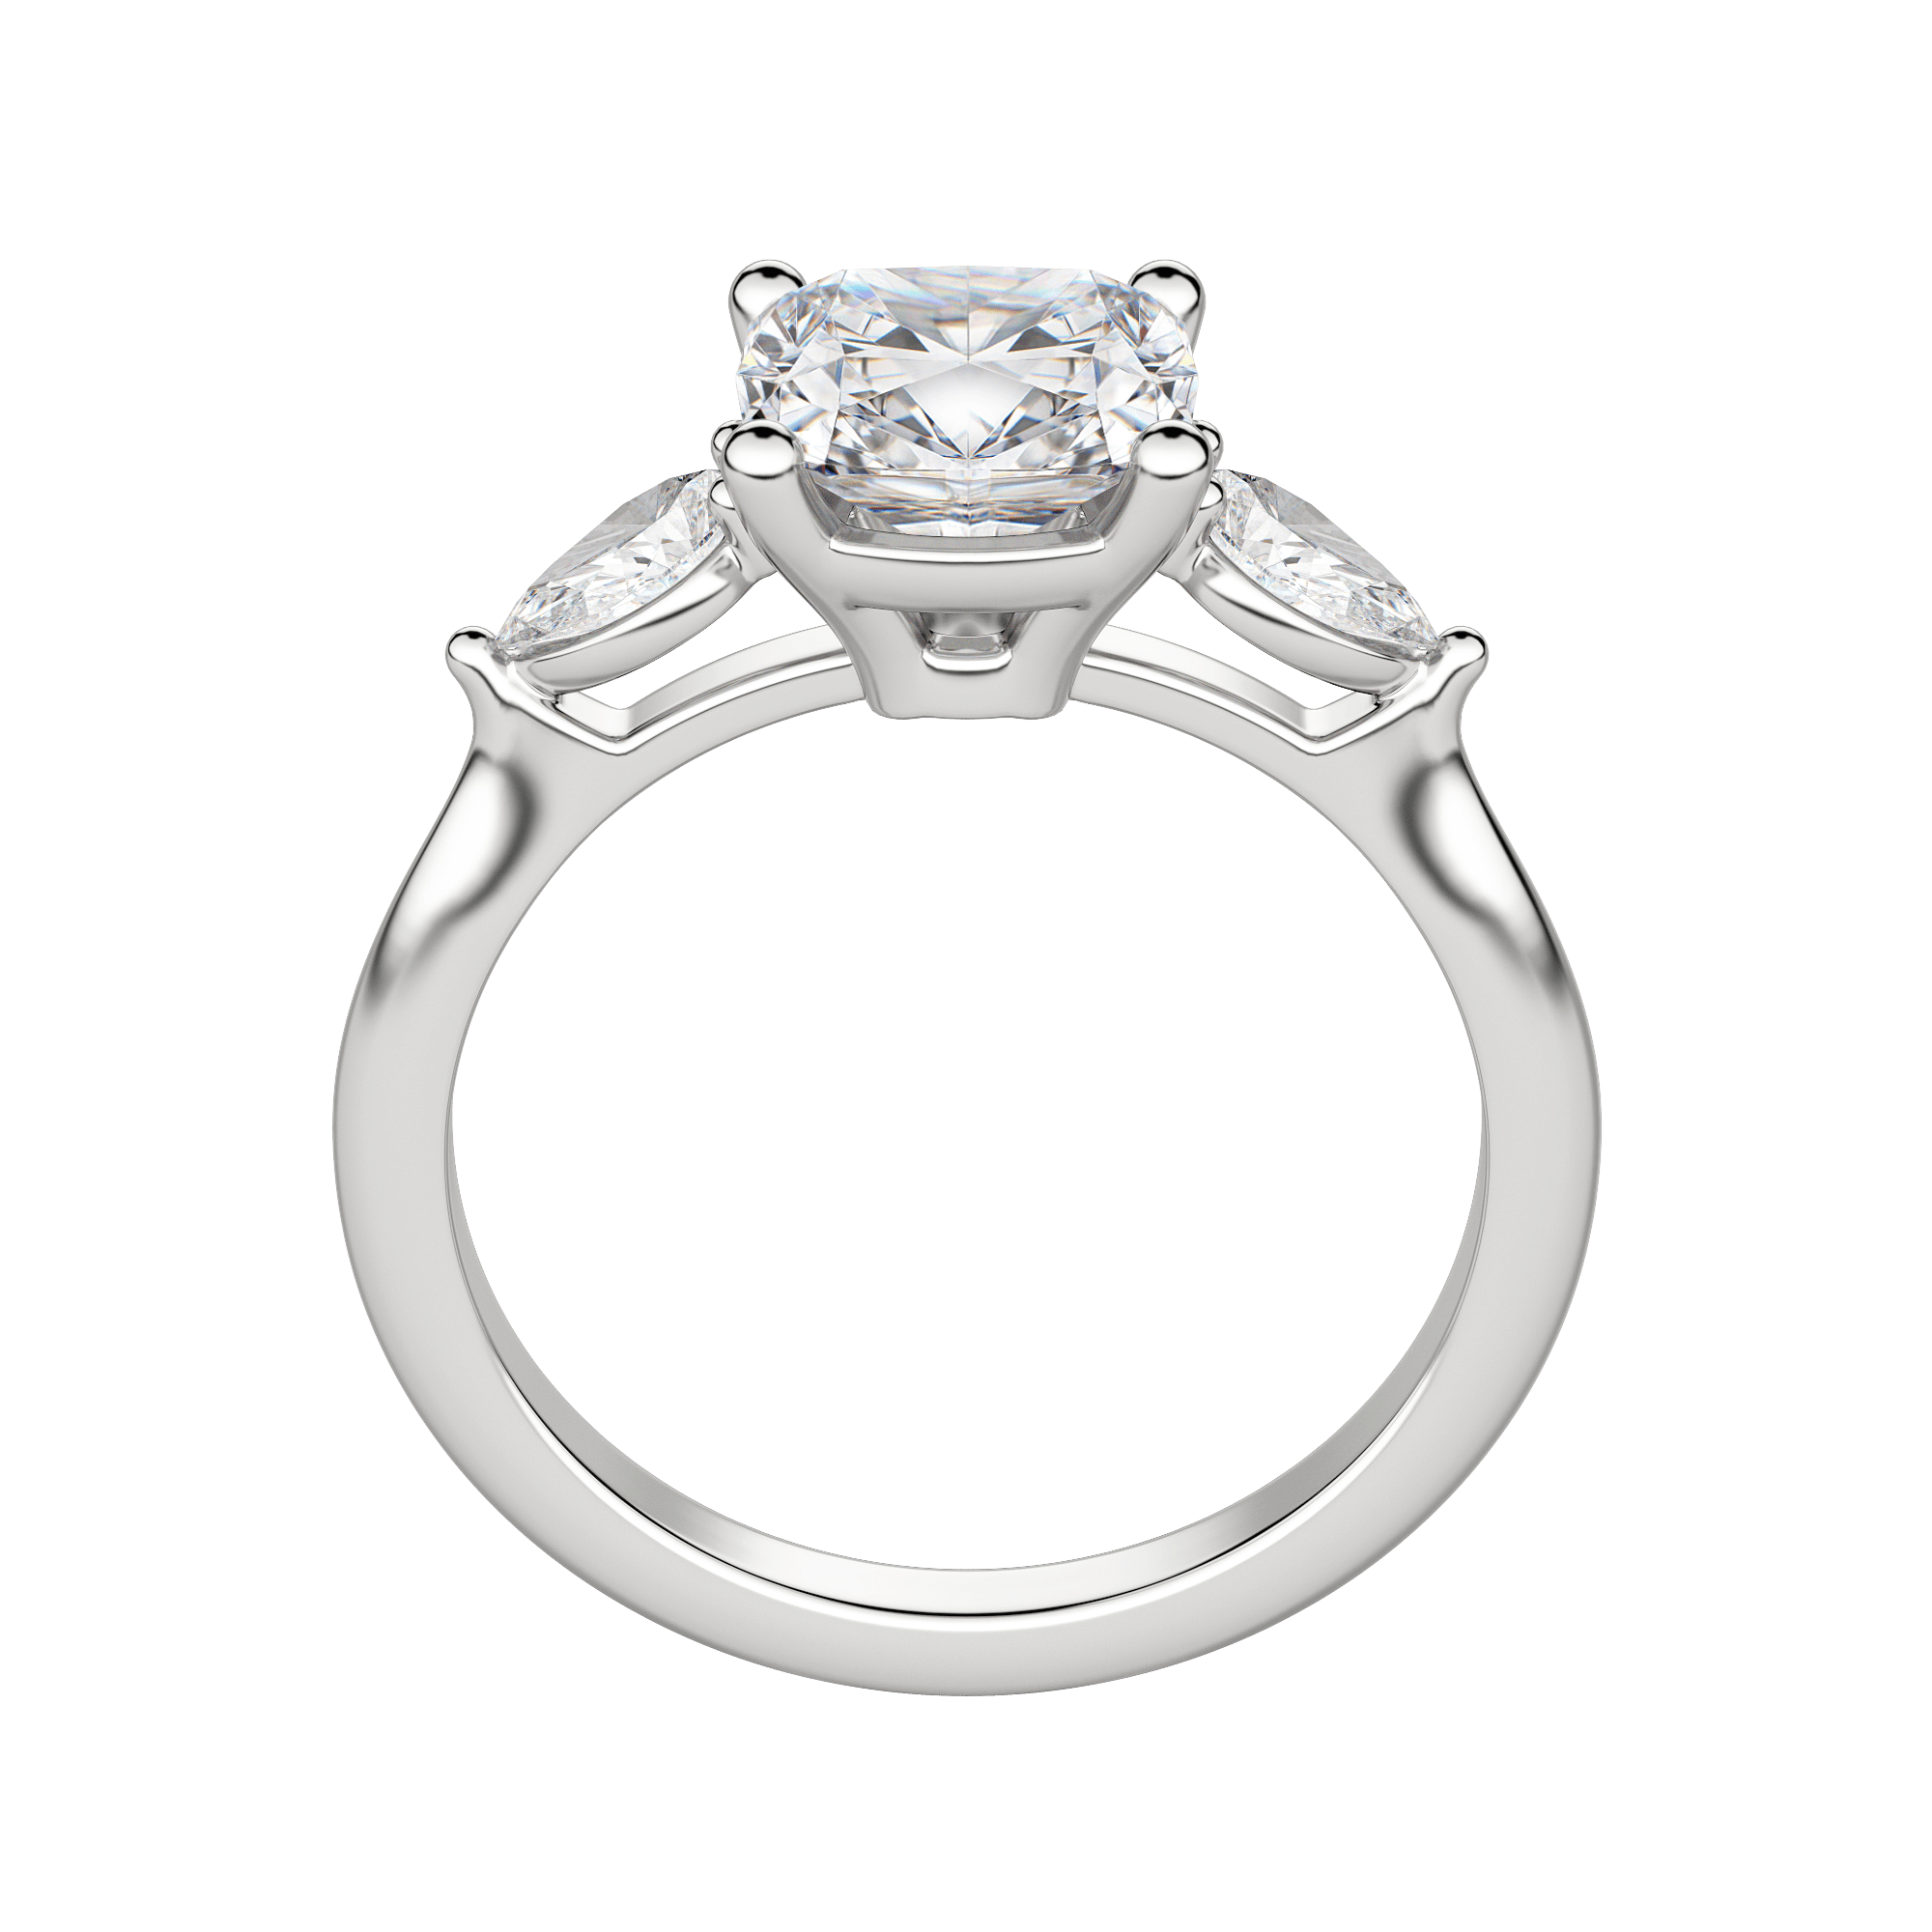 Lily Classic Cushion Cut Engagement Ring, Hover, Platinum, 18K White Gold, 